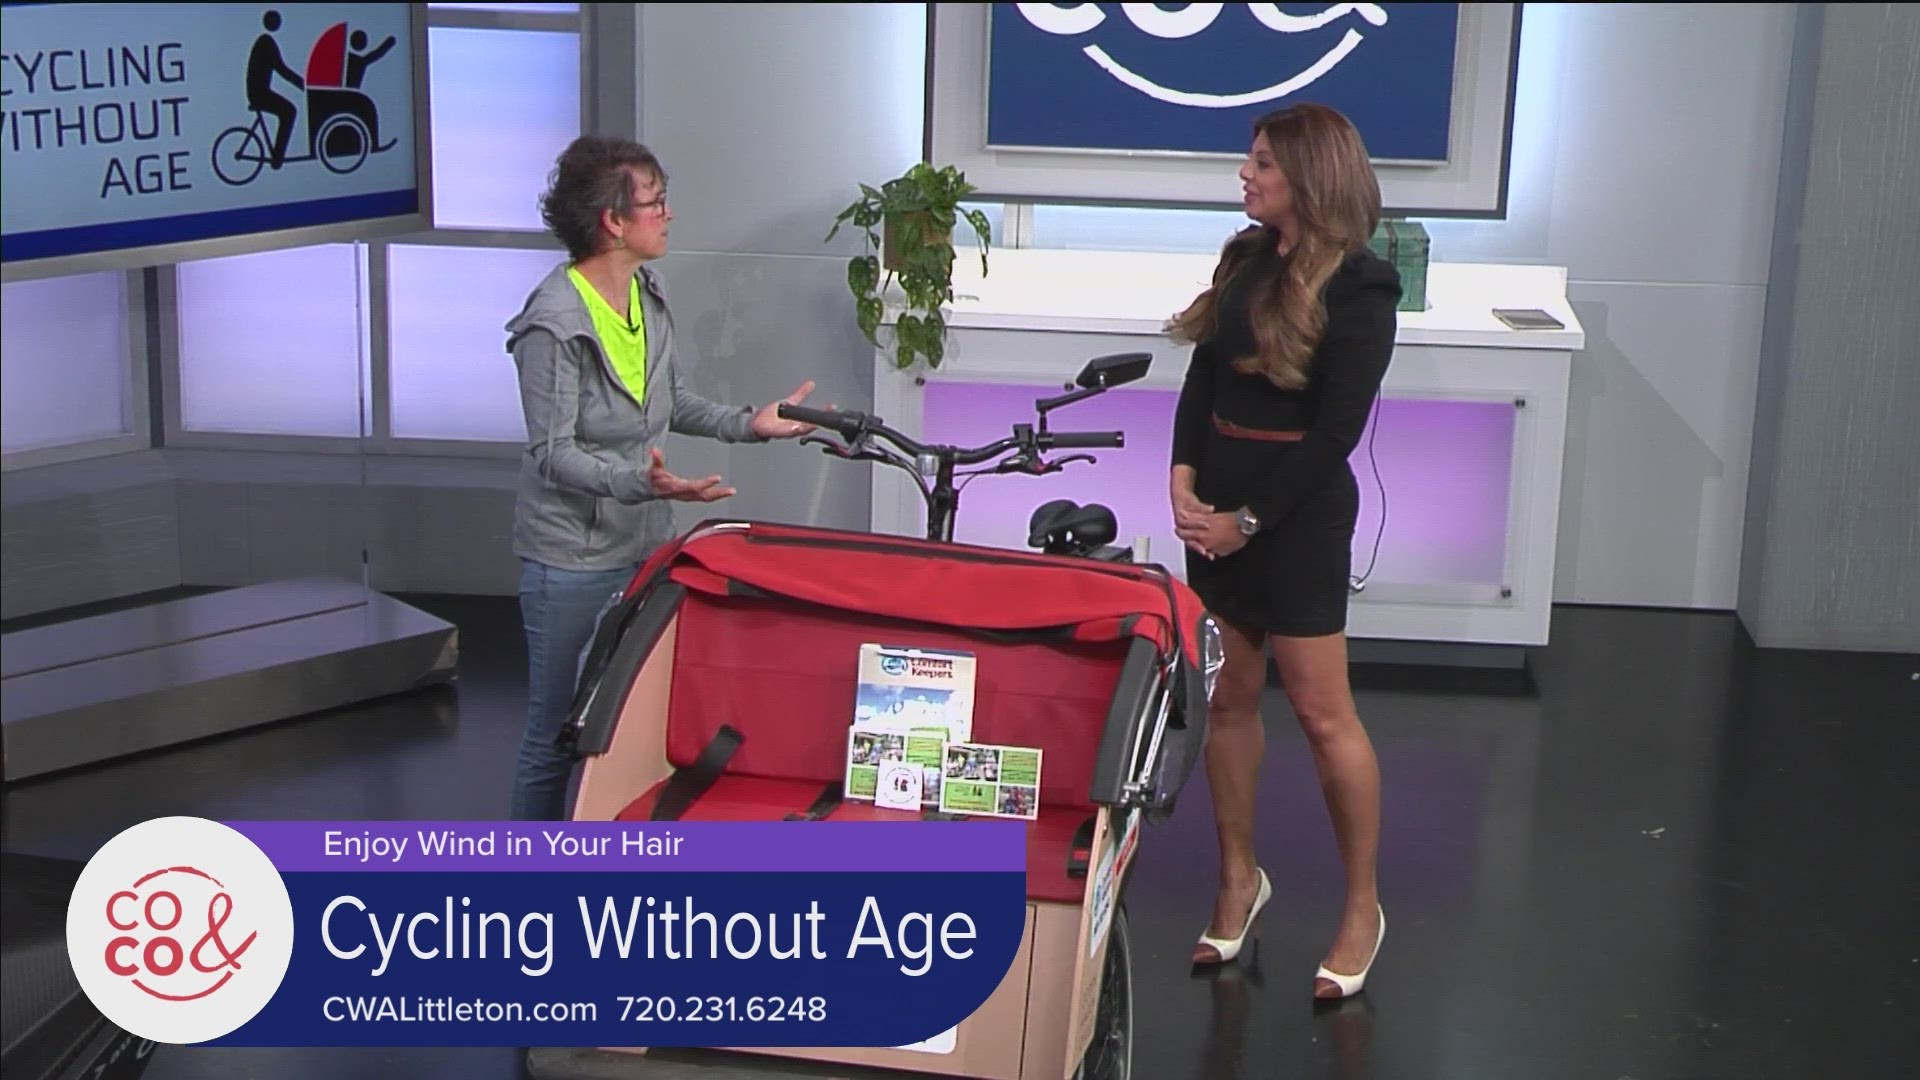 Take a TriShaw ride with someone you love! Support Cycling Without Age and learn more at CWALittleton.com. Aetna Medicare Solutions sponsored this segment.